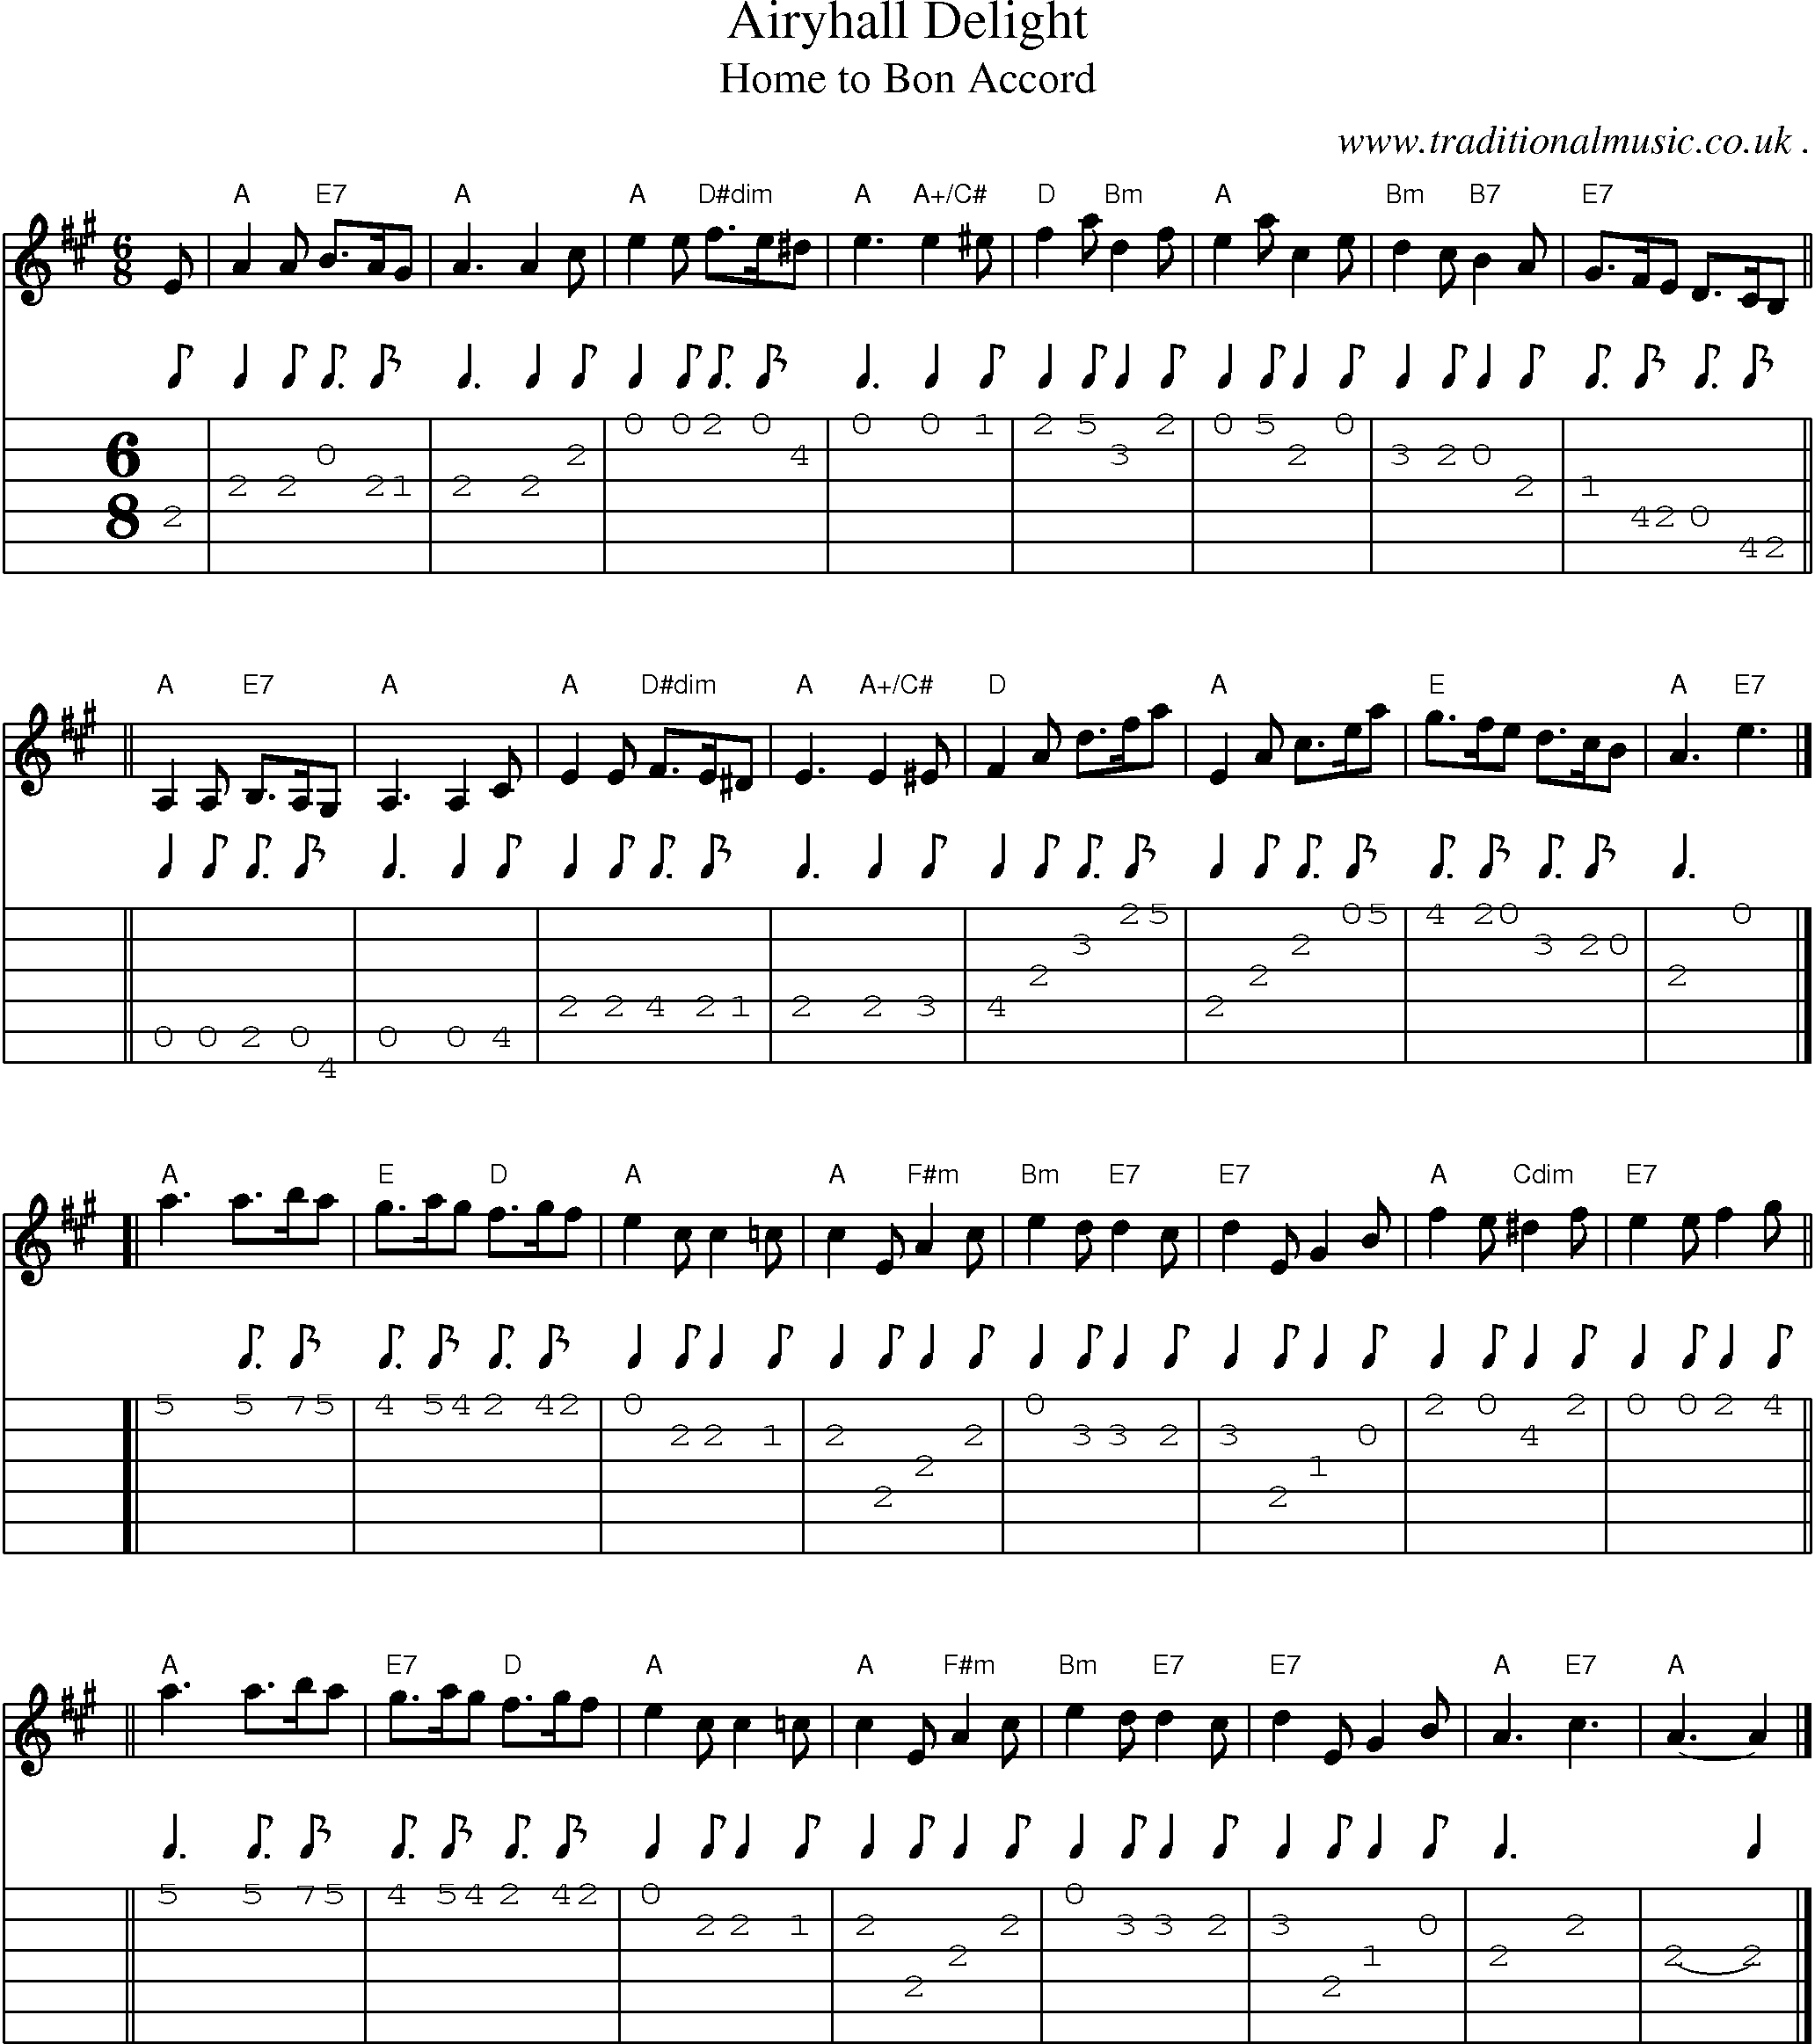 Sheet-music  score, Chords and Guitar Tabs for Airyhall Delight